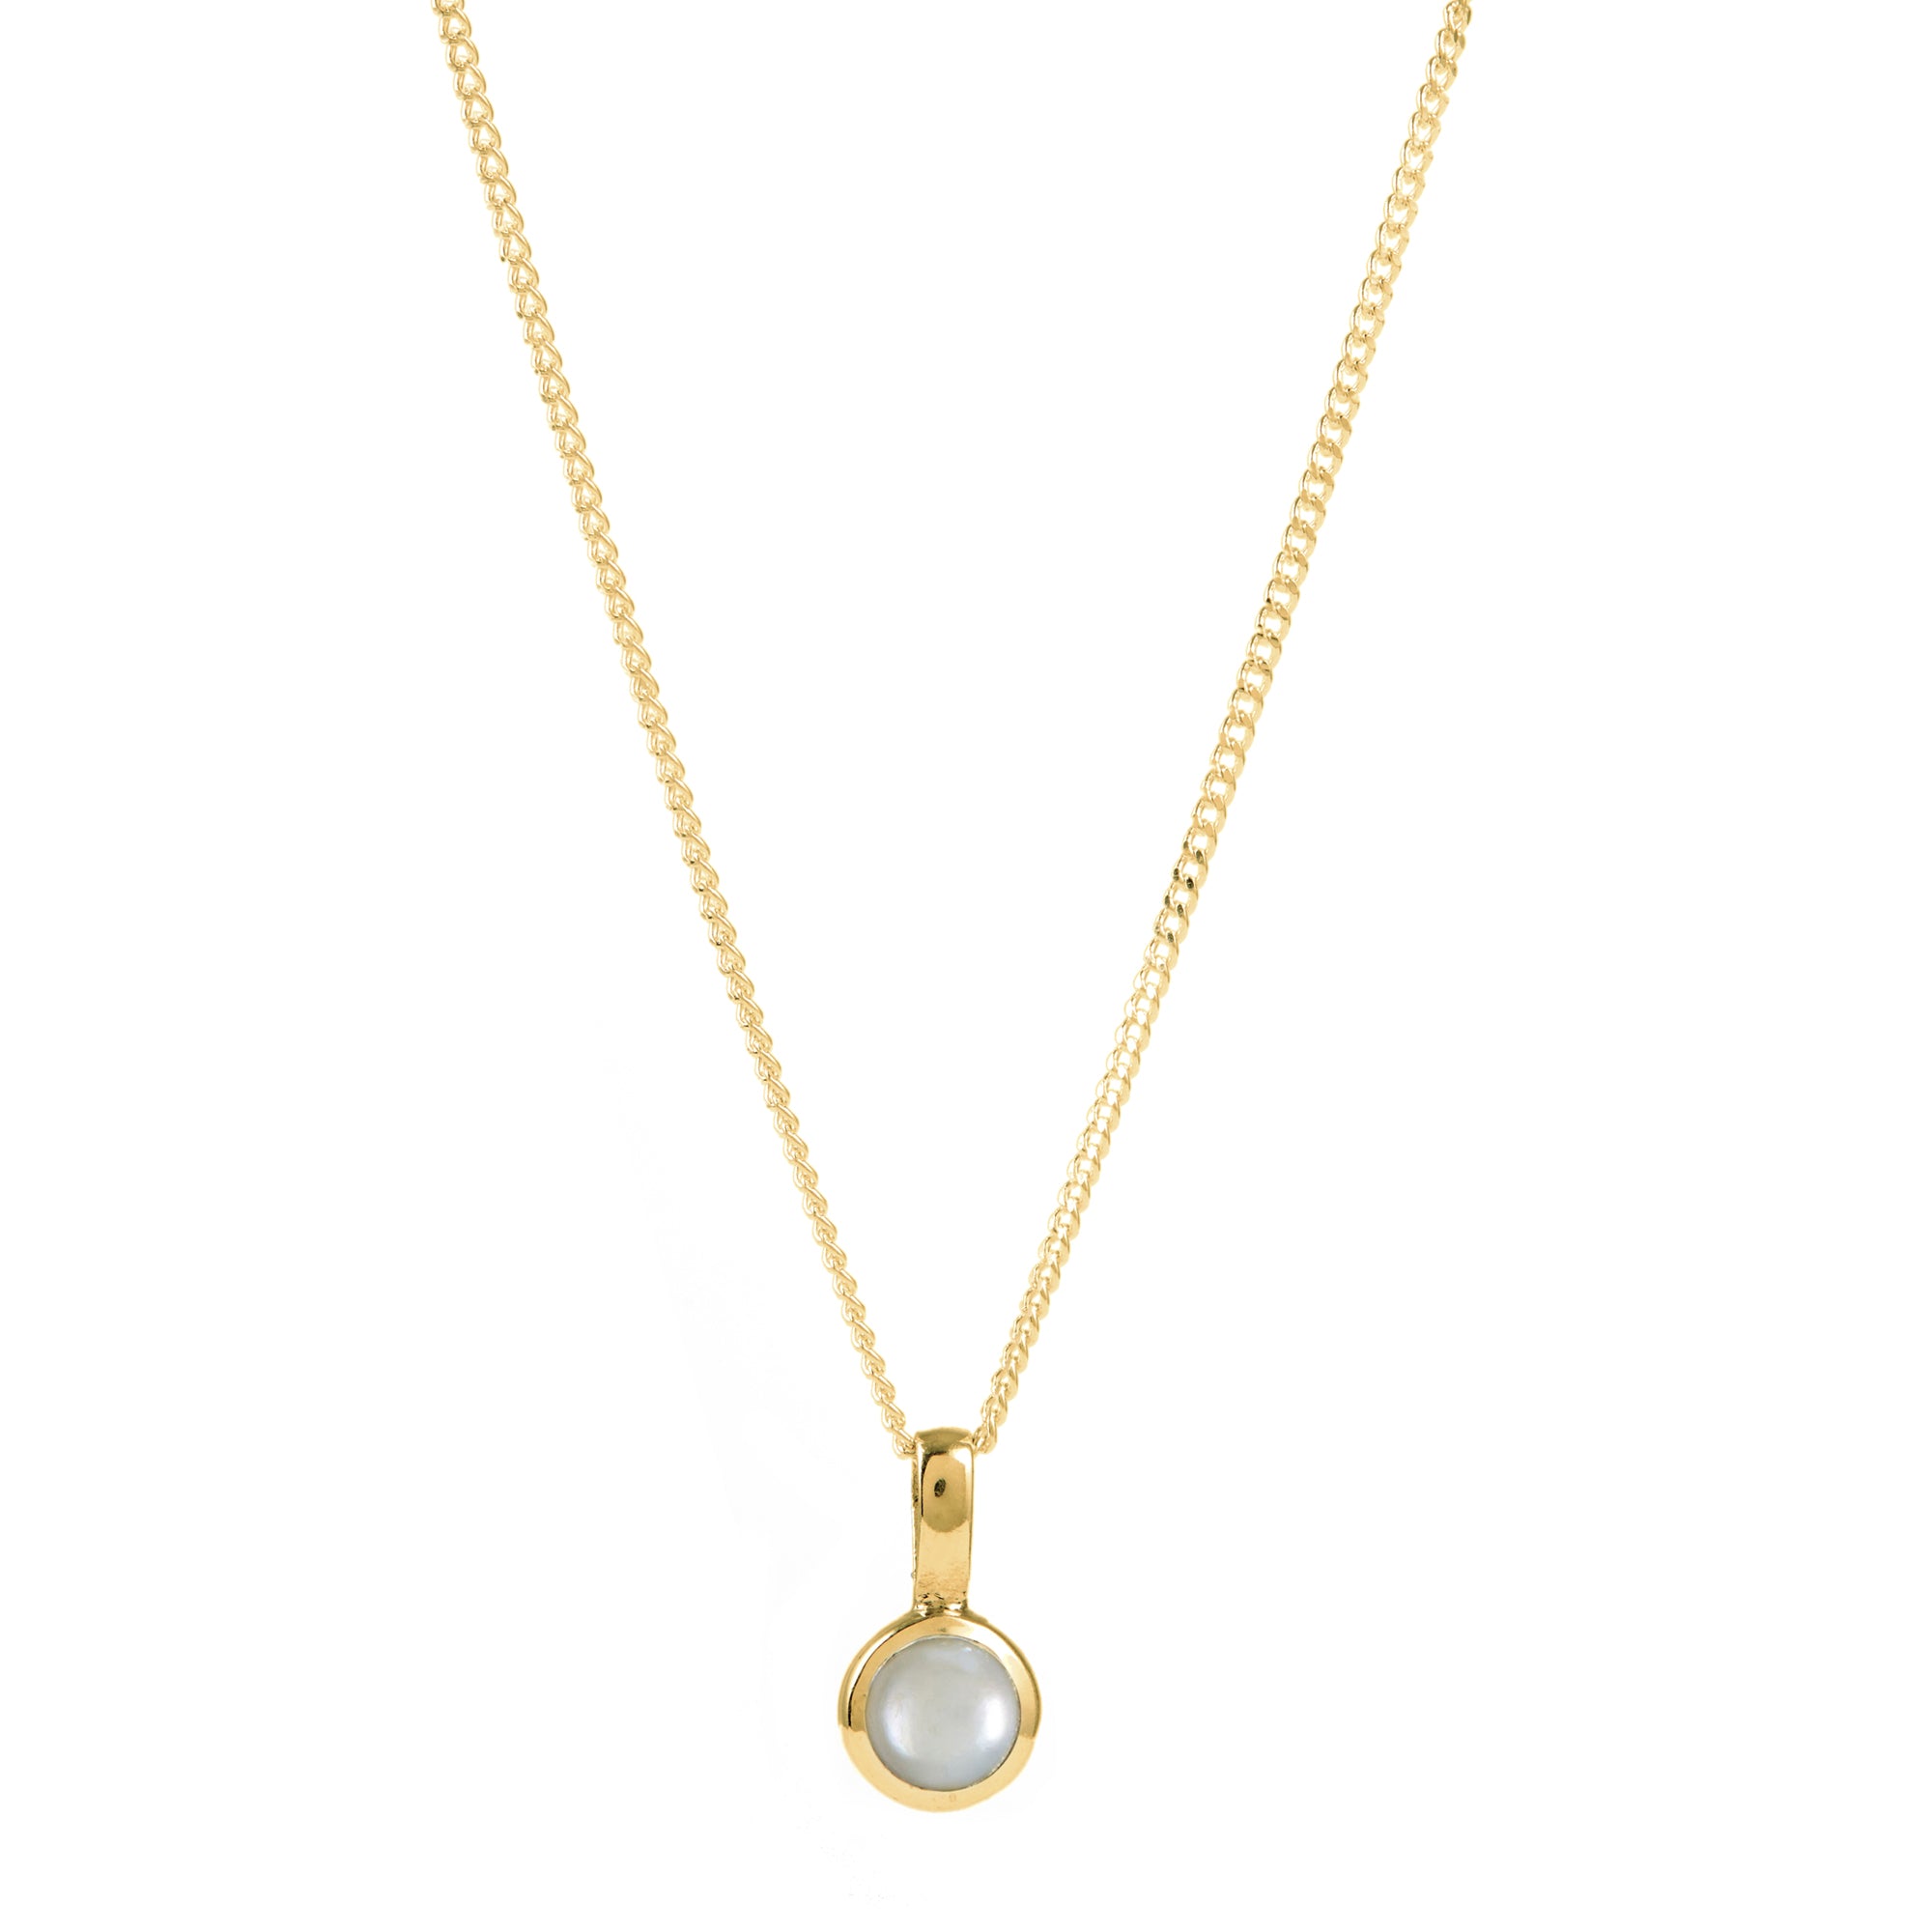 Pearl June Birthstone Charm Necklace